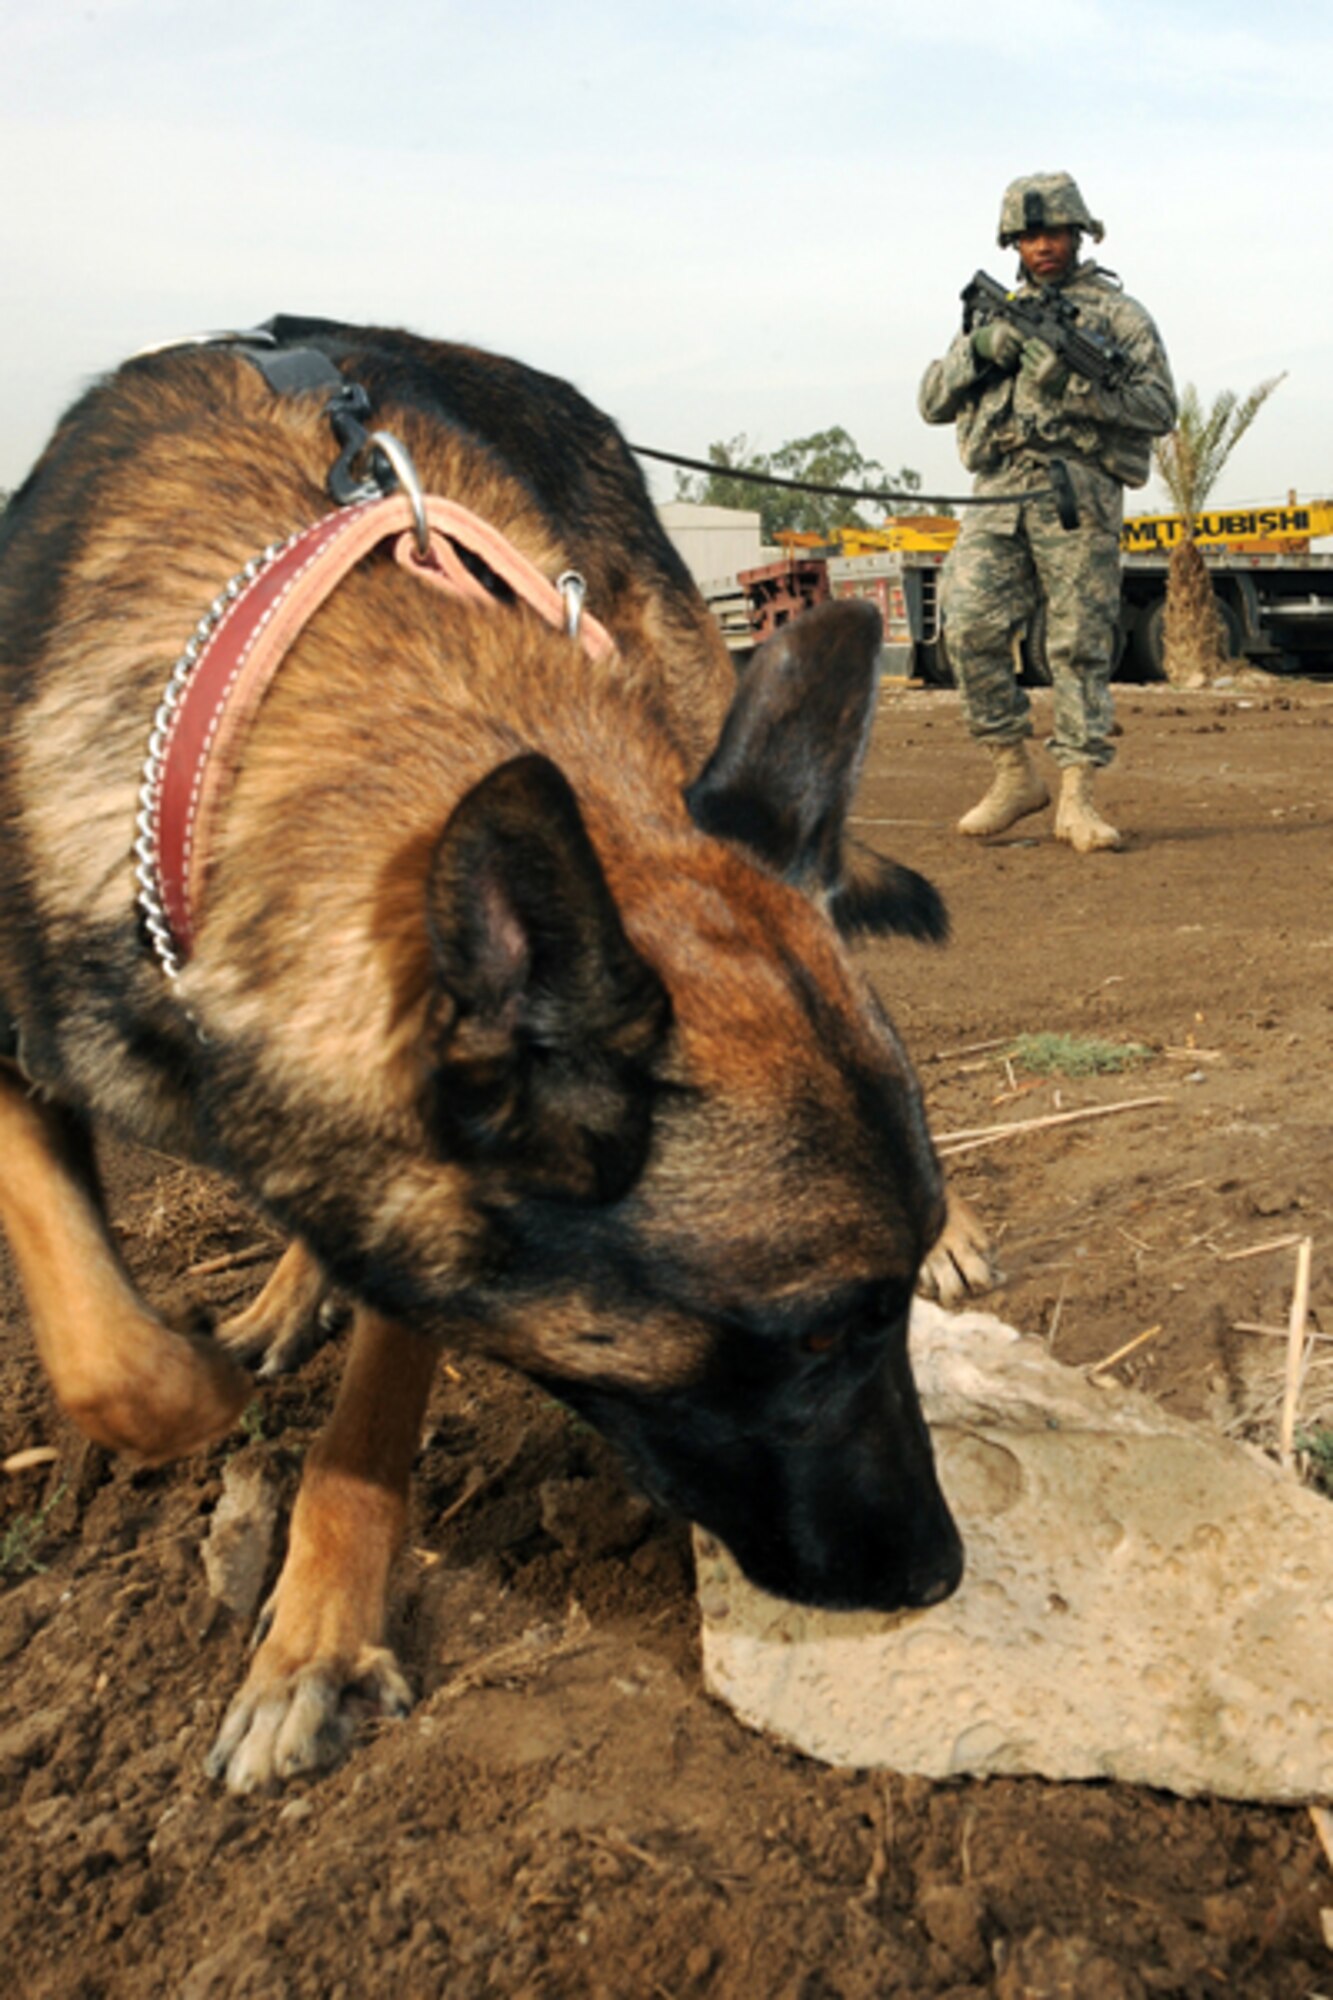 Senior Airman Mark Bush, Multinational Division Baghdad military working dog handler, and MWD Chukky search for explosives during a training session at Camp Victory, Iraq, Oct. 28, 2009. After being deployed twice together, Bush, now a staff sergeant with the 28th security forces squadron, adopted Chukky July 10, 2015, following four years of separation. (U.S. Air Force photo by Tech. Sgt. Johnny L. Saldivar/Released)